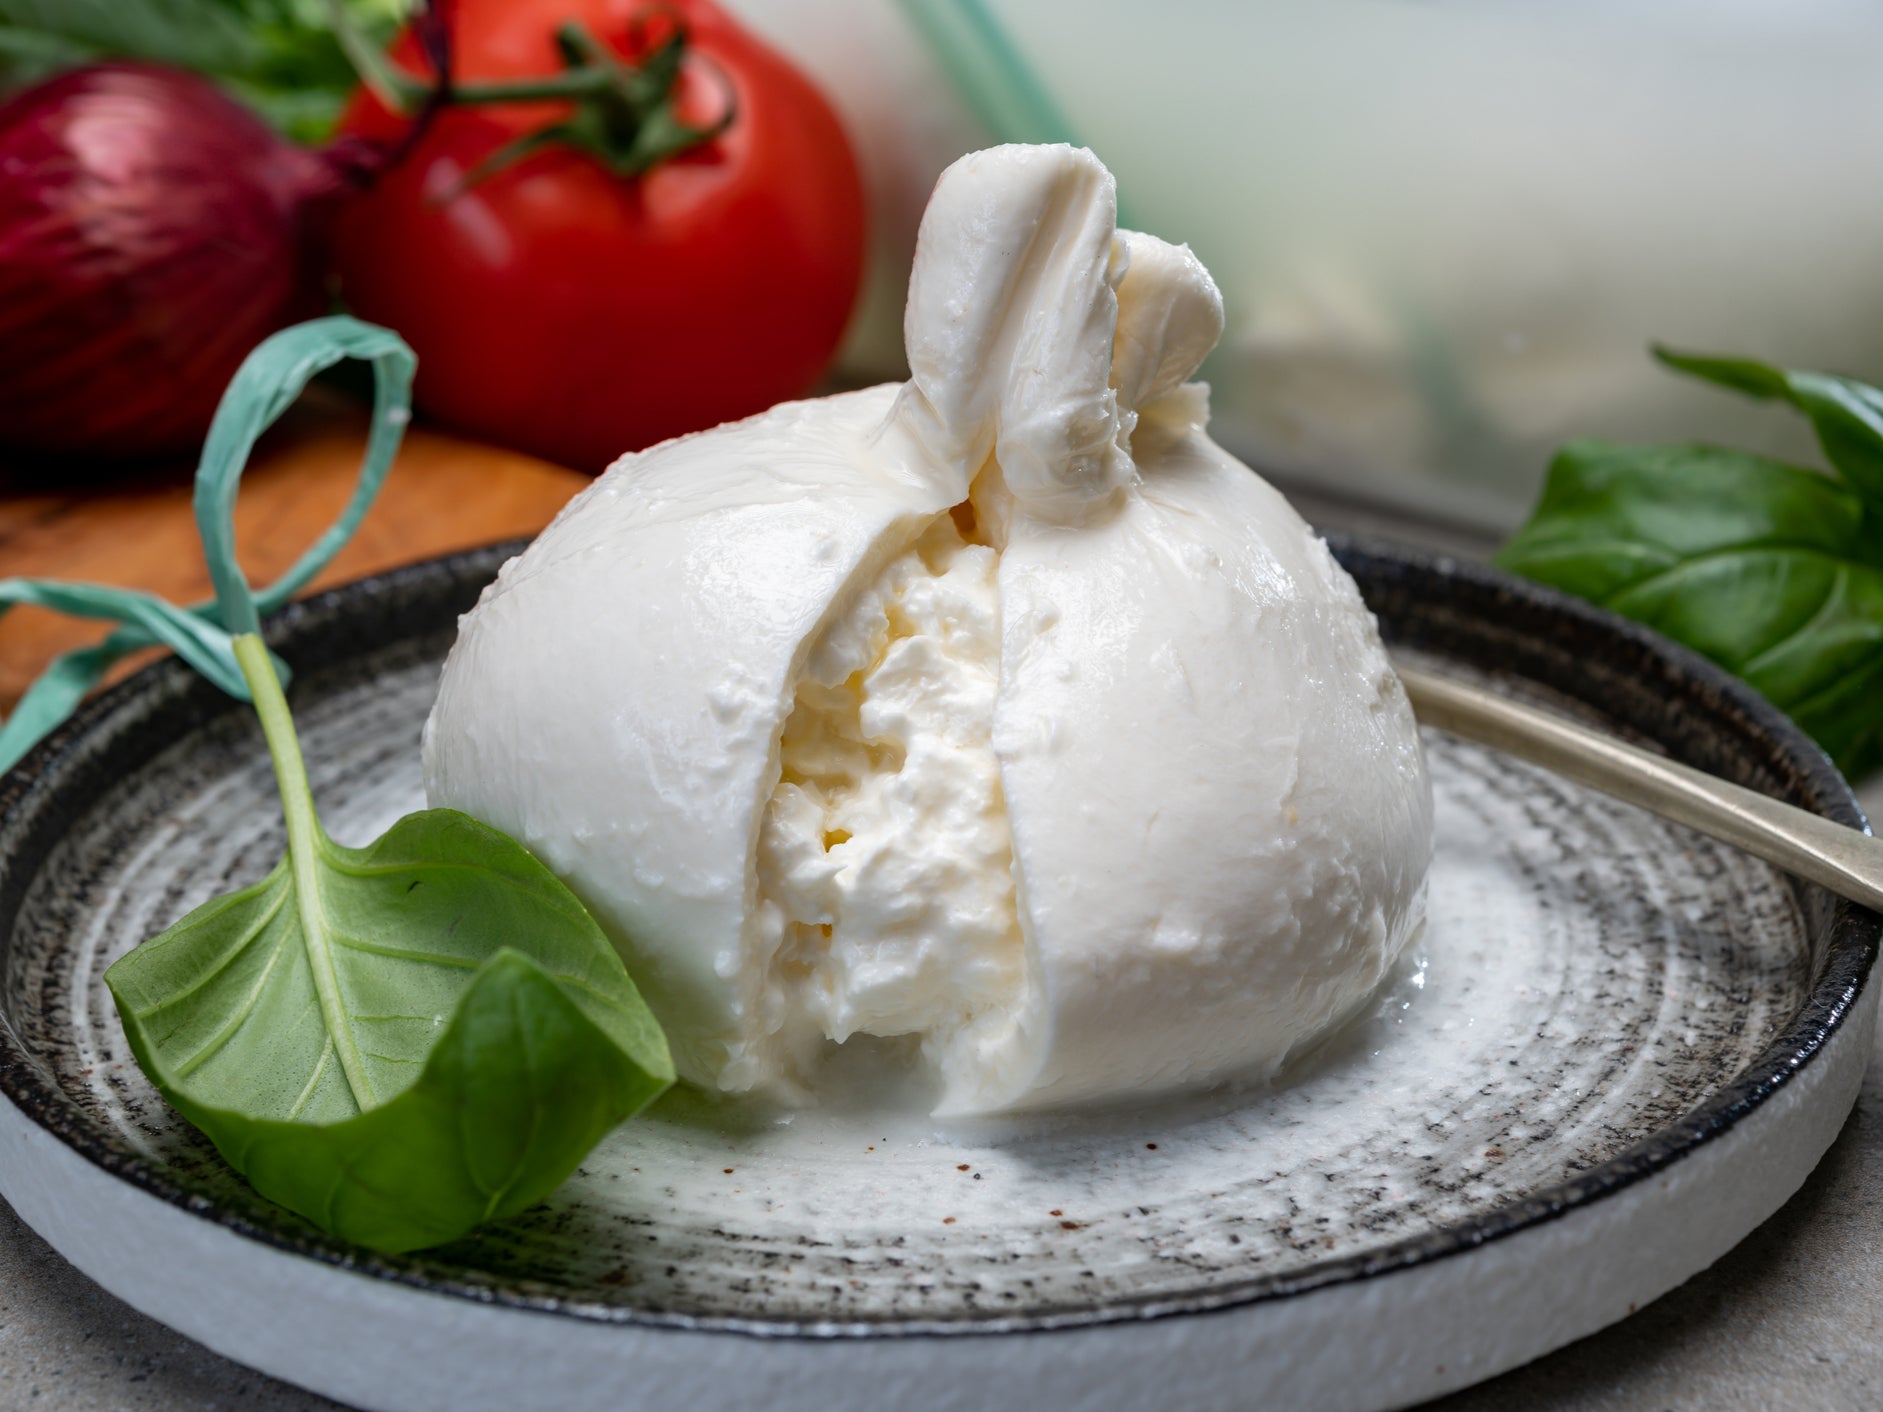 People are surprisingly divided over burrata as debate oozes online